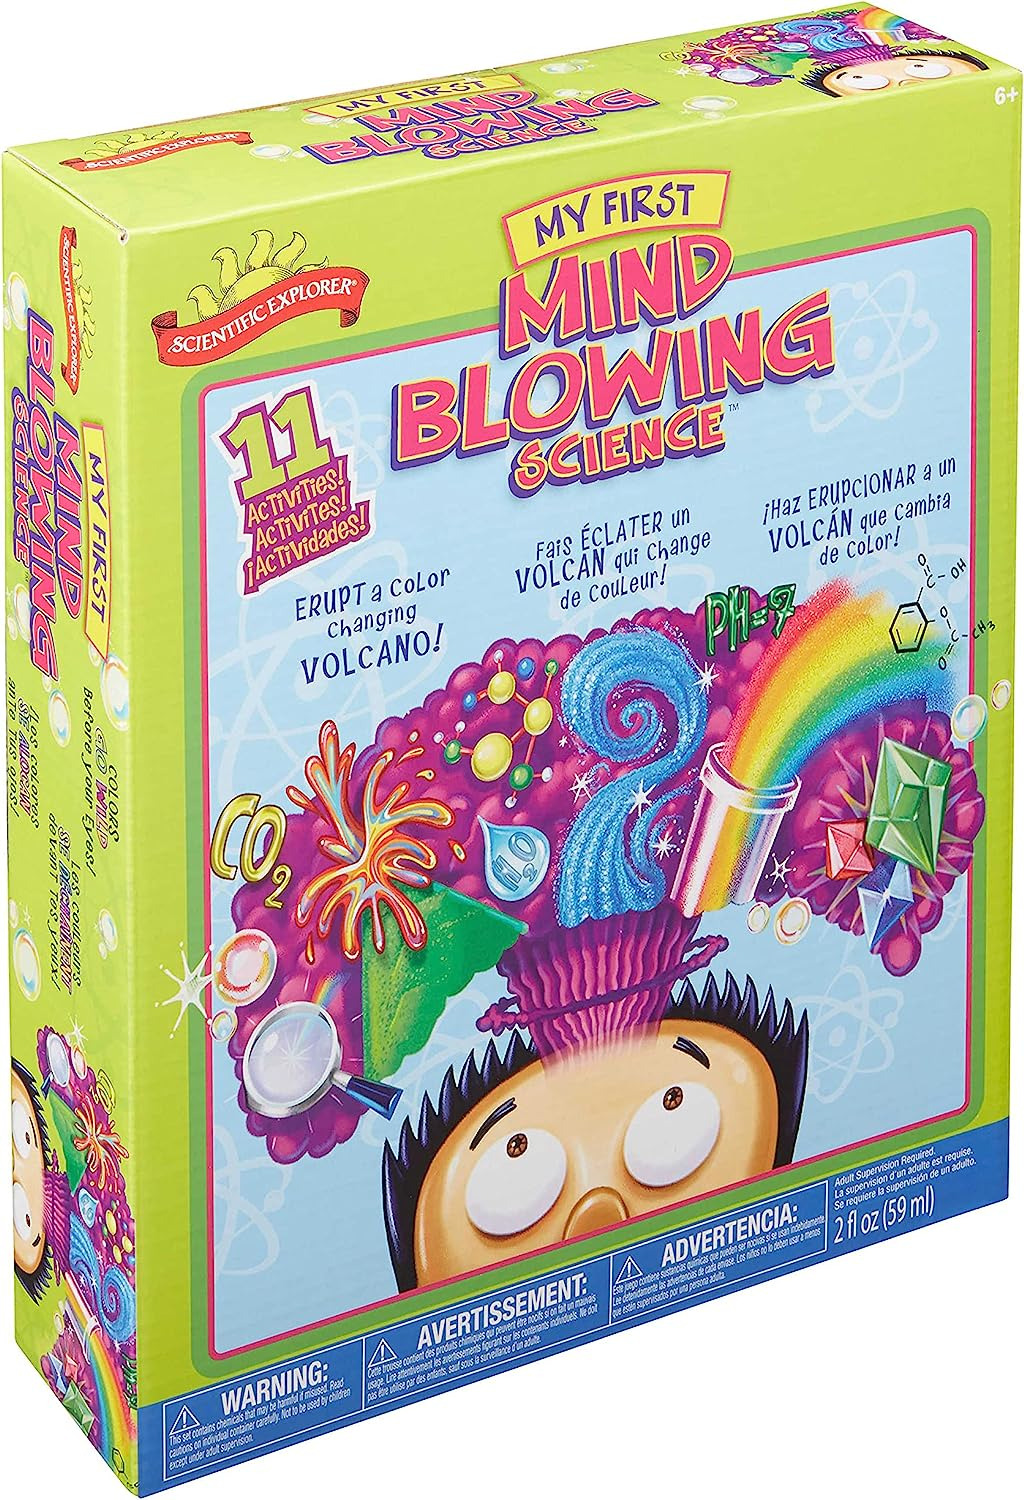 Scientific Explorer My First Mind Blowing Science Experiment Kit 11 Activities